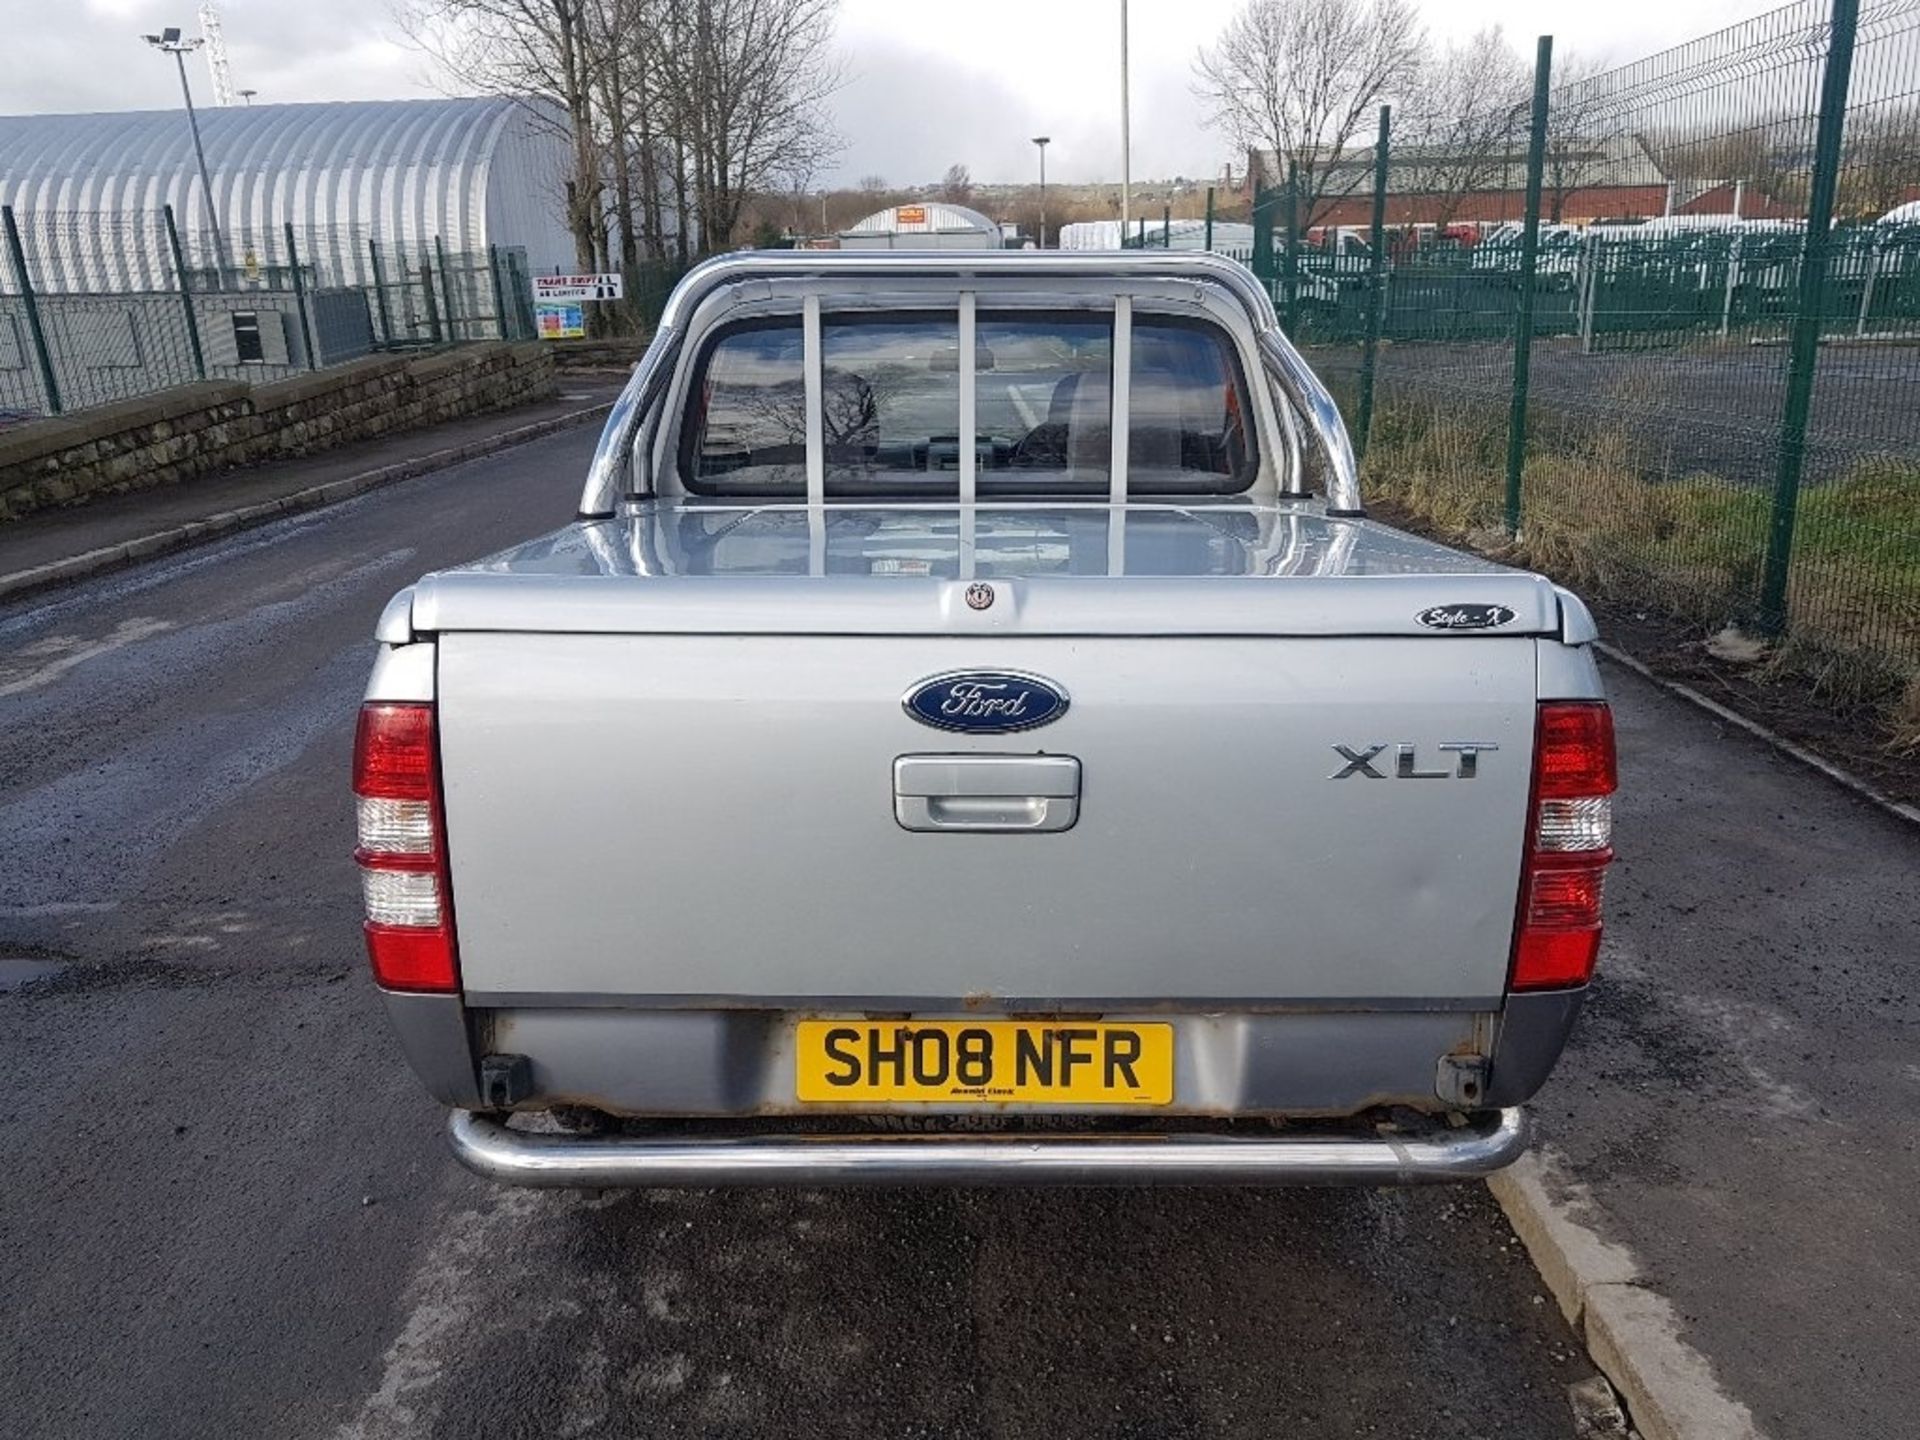 FORD 4X4, RANGER 2.5 TDCI XLT DOUBLE CAB, SH08 NFR, FIRST DATE OF REGISTRATION 30/05/2008, 2.5 - Image 9 of 15